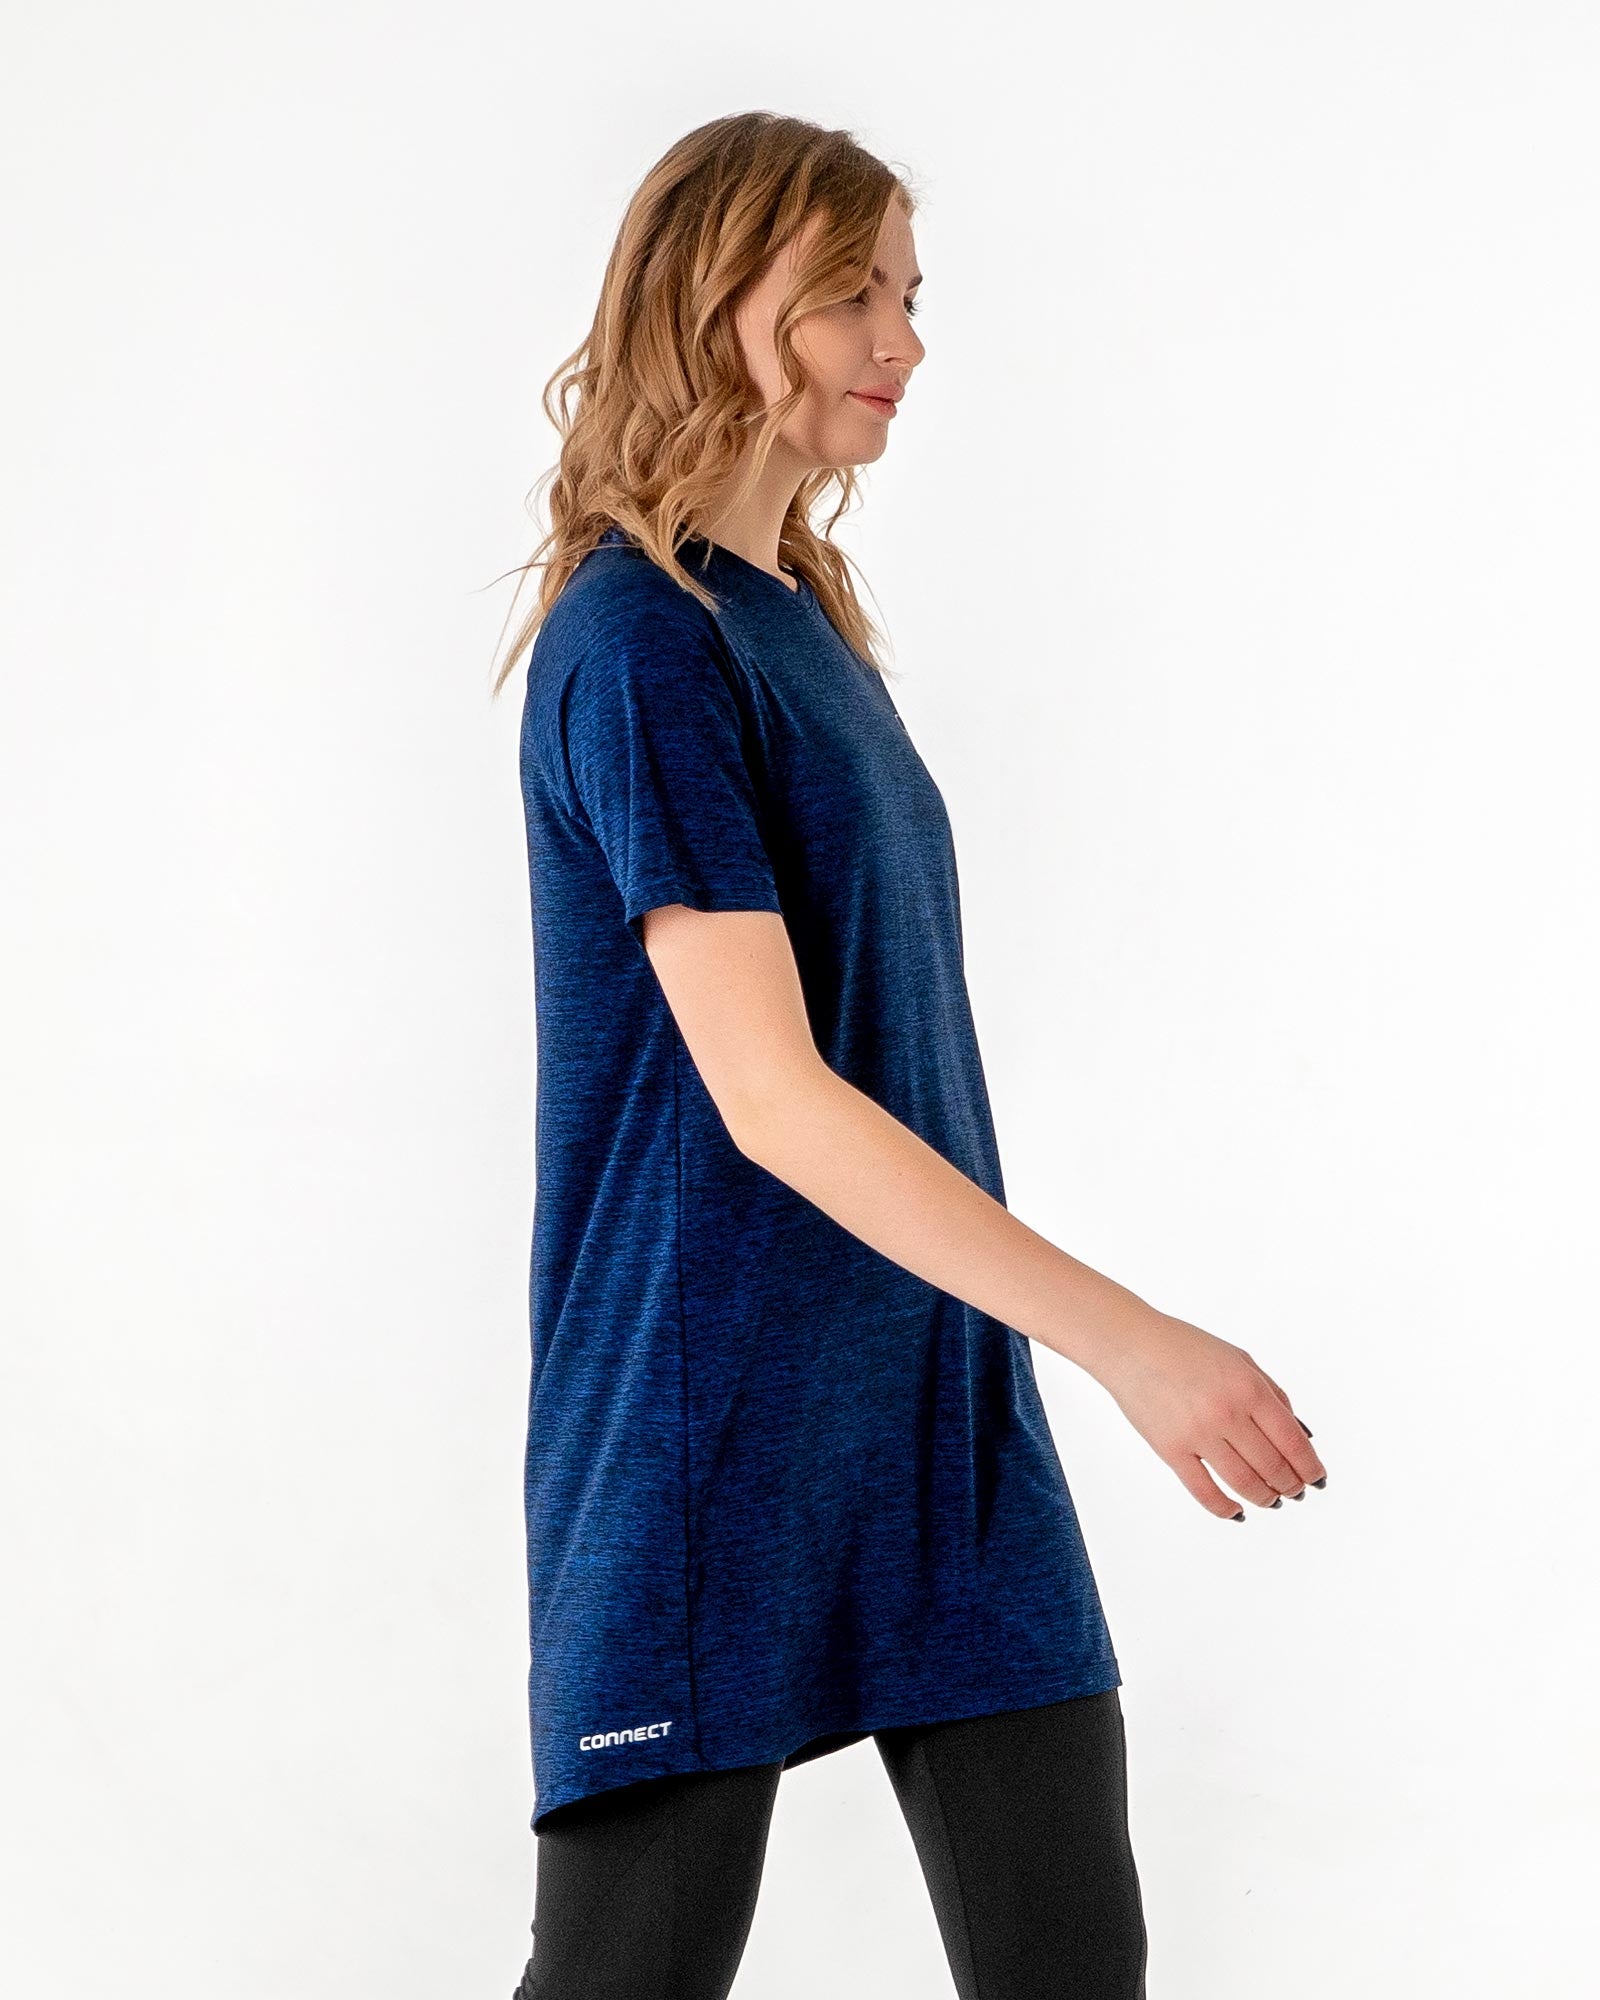 Connect T-Shirt Dress in Blue by Veil Garments. Modest activewear collection.